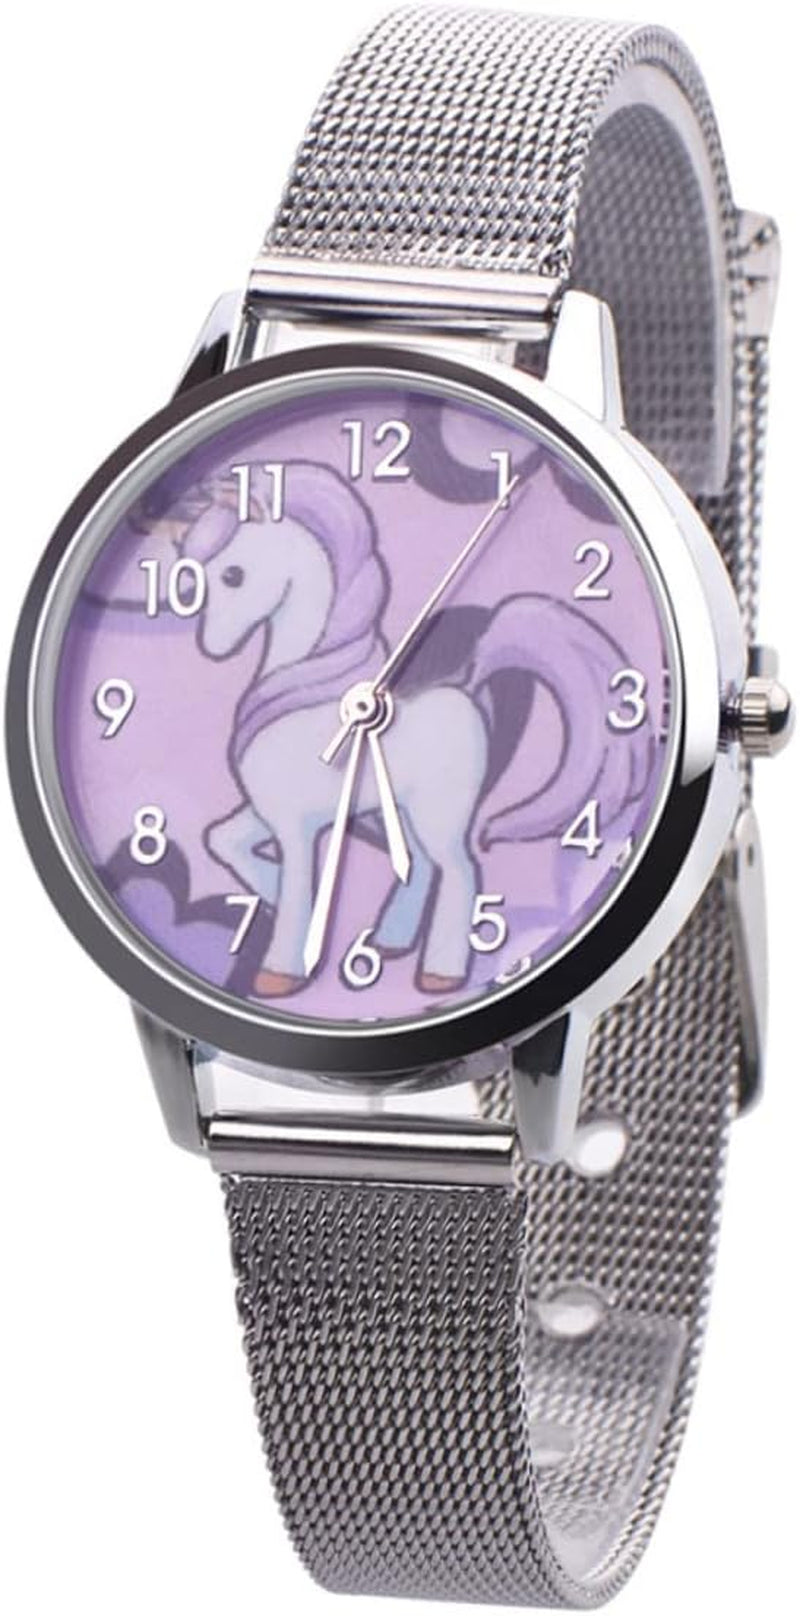 2Pcs Fashion Leather Gift Birthday Pink for Bands Kids with Device Time Unicorn Pattern Wrist Cartoon Watch Children